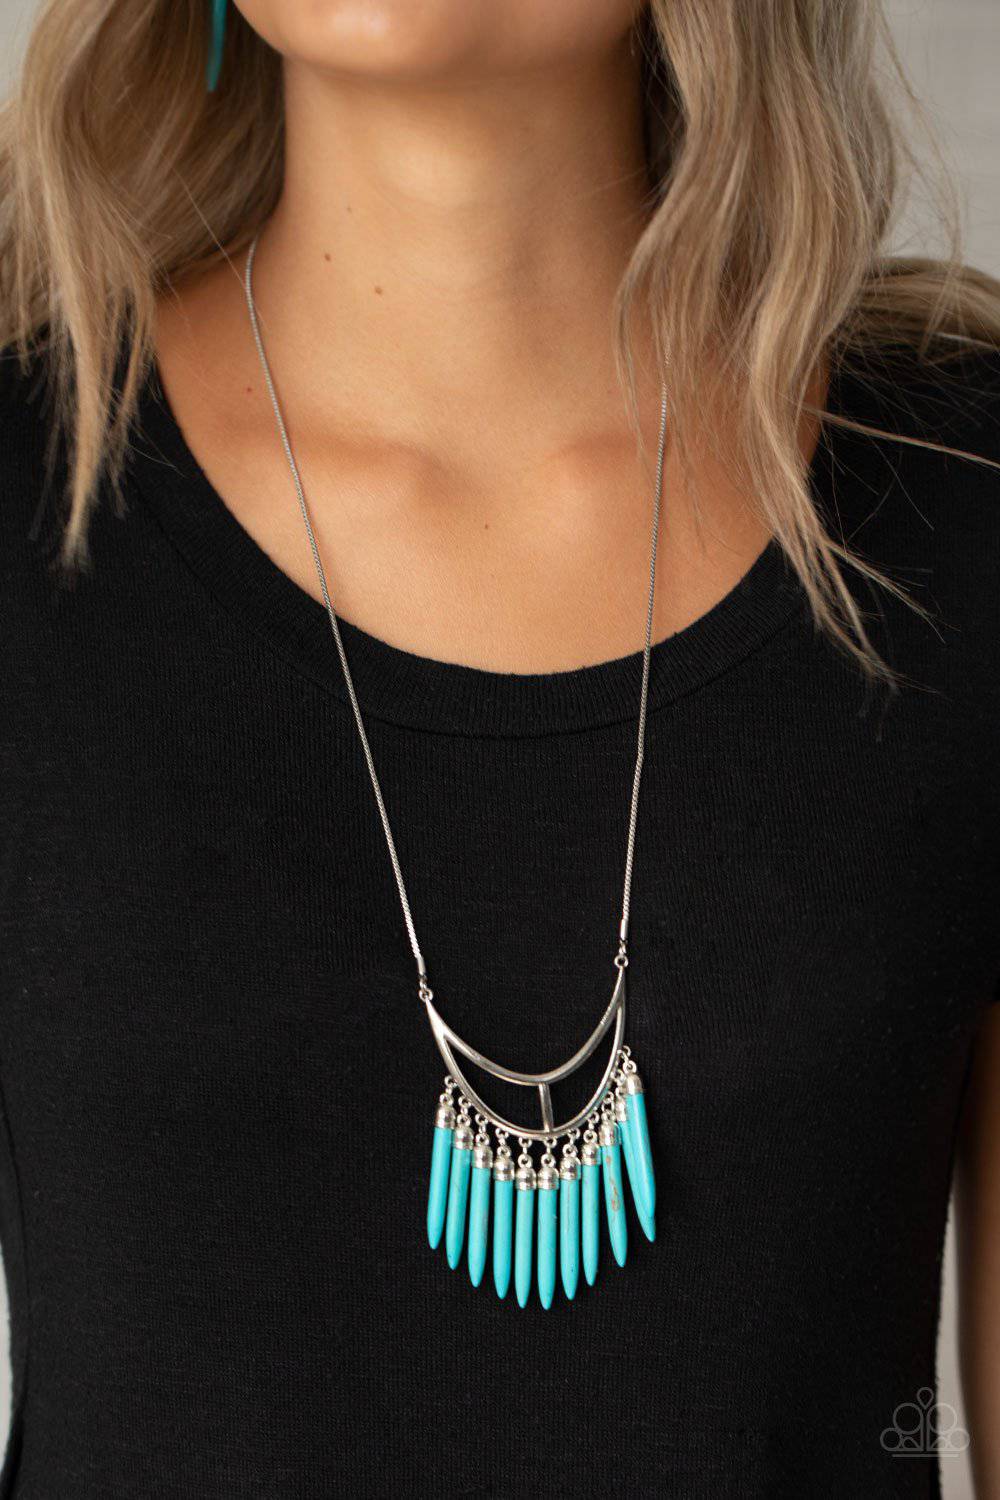 Stone Age A-Lister - Blue Fringe Necklace - Paparazzi Accessories - GlaMarous Titi Jewels